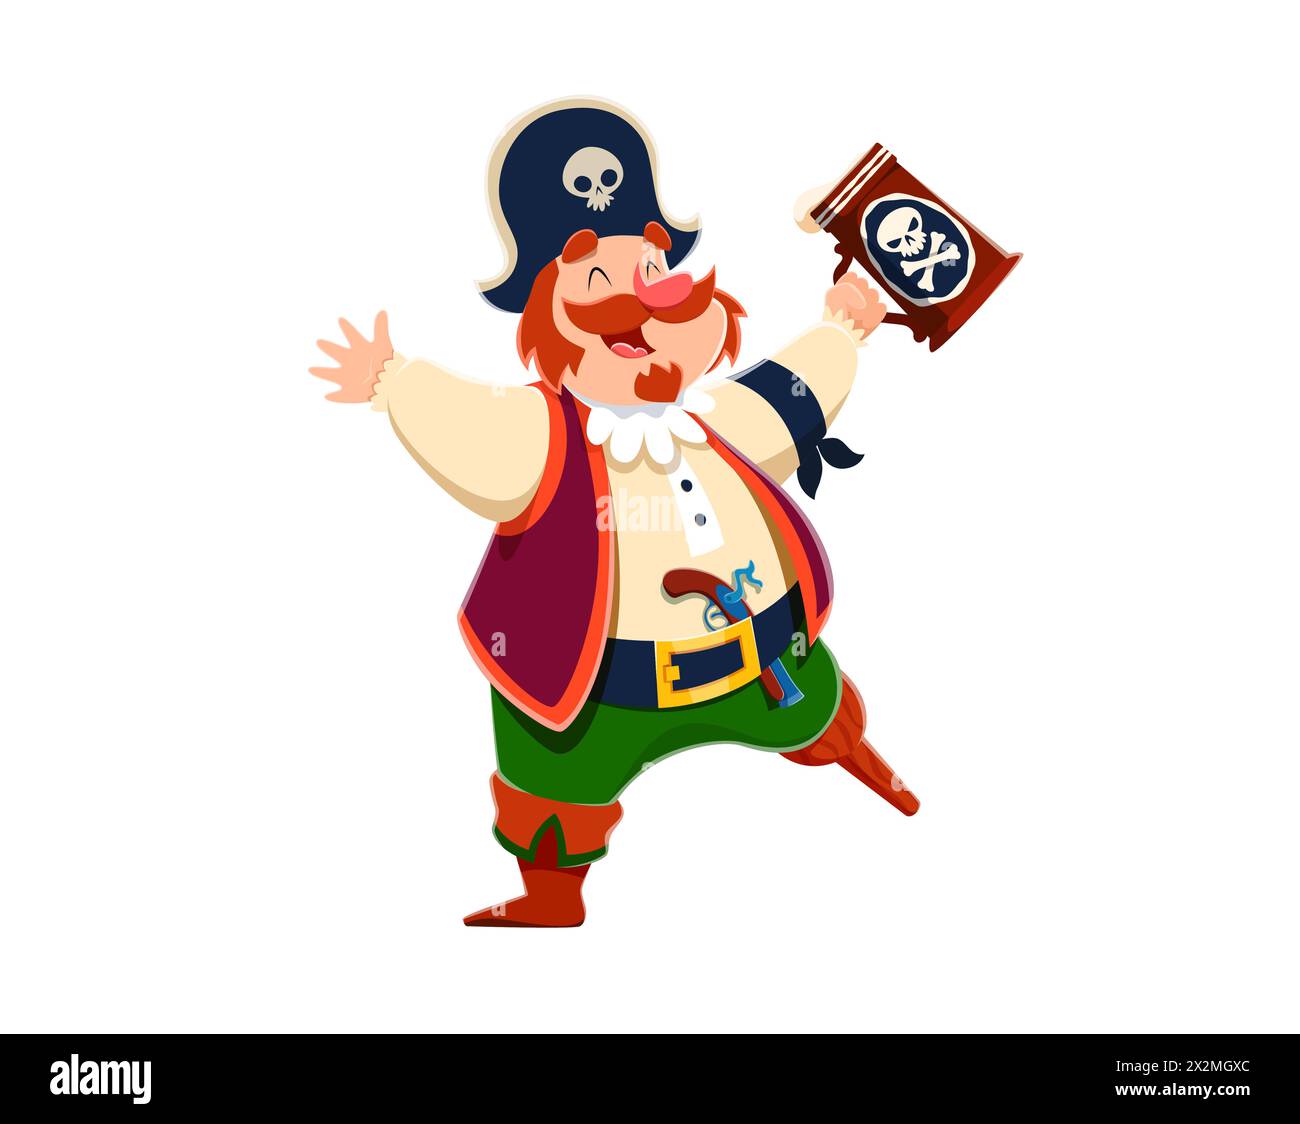 Cartoon funny pirate captain character with beer tankard, corsair seaman. Isolated vector jovial one legged buccaneer raises a frothy mug with a toothy grin, and gun on his plump, belt-cinched waist Stock Vector